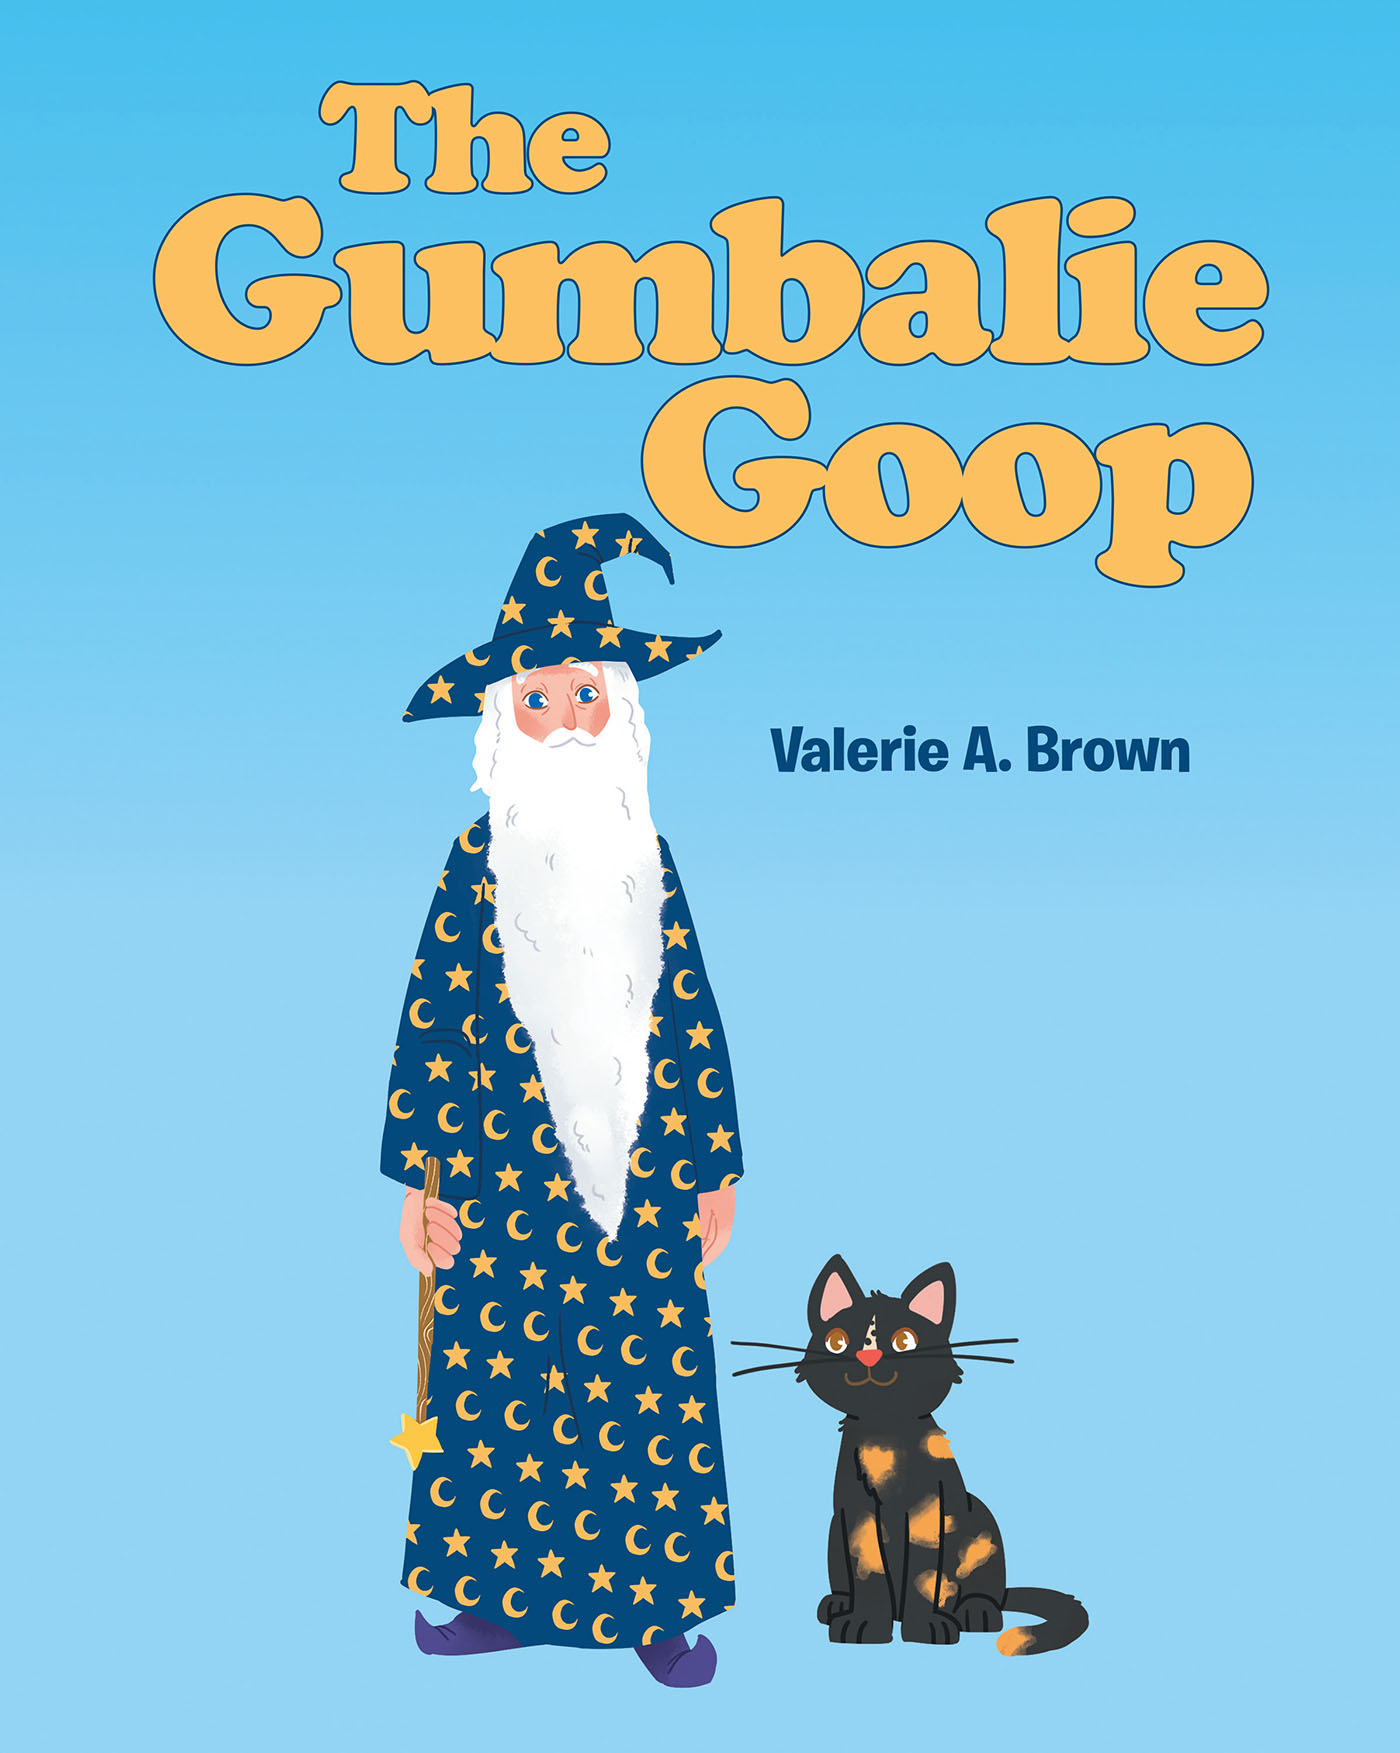 Valerie A. Brown’s New Book "The Gumbalie Goop" is an Adorable Tale That Follows a Bumbling Wizard Who is Ready to Give Up on His Magic After All His Spells Seem to Fail